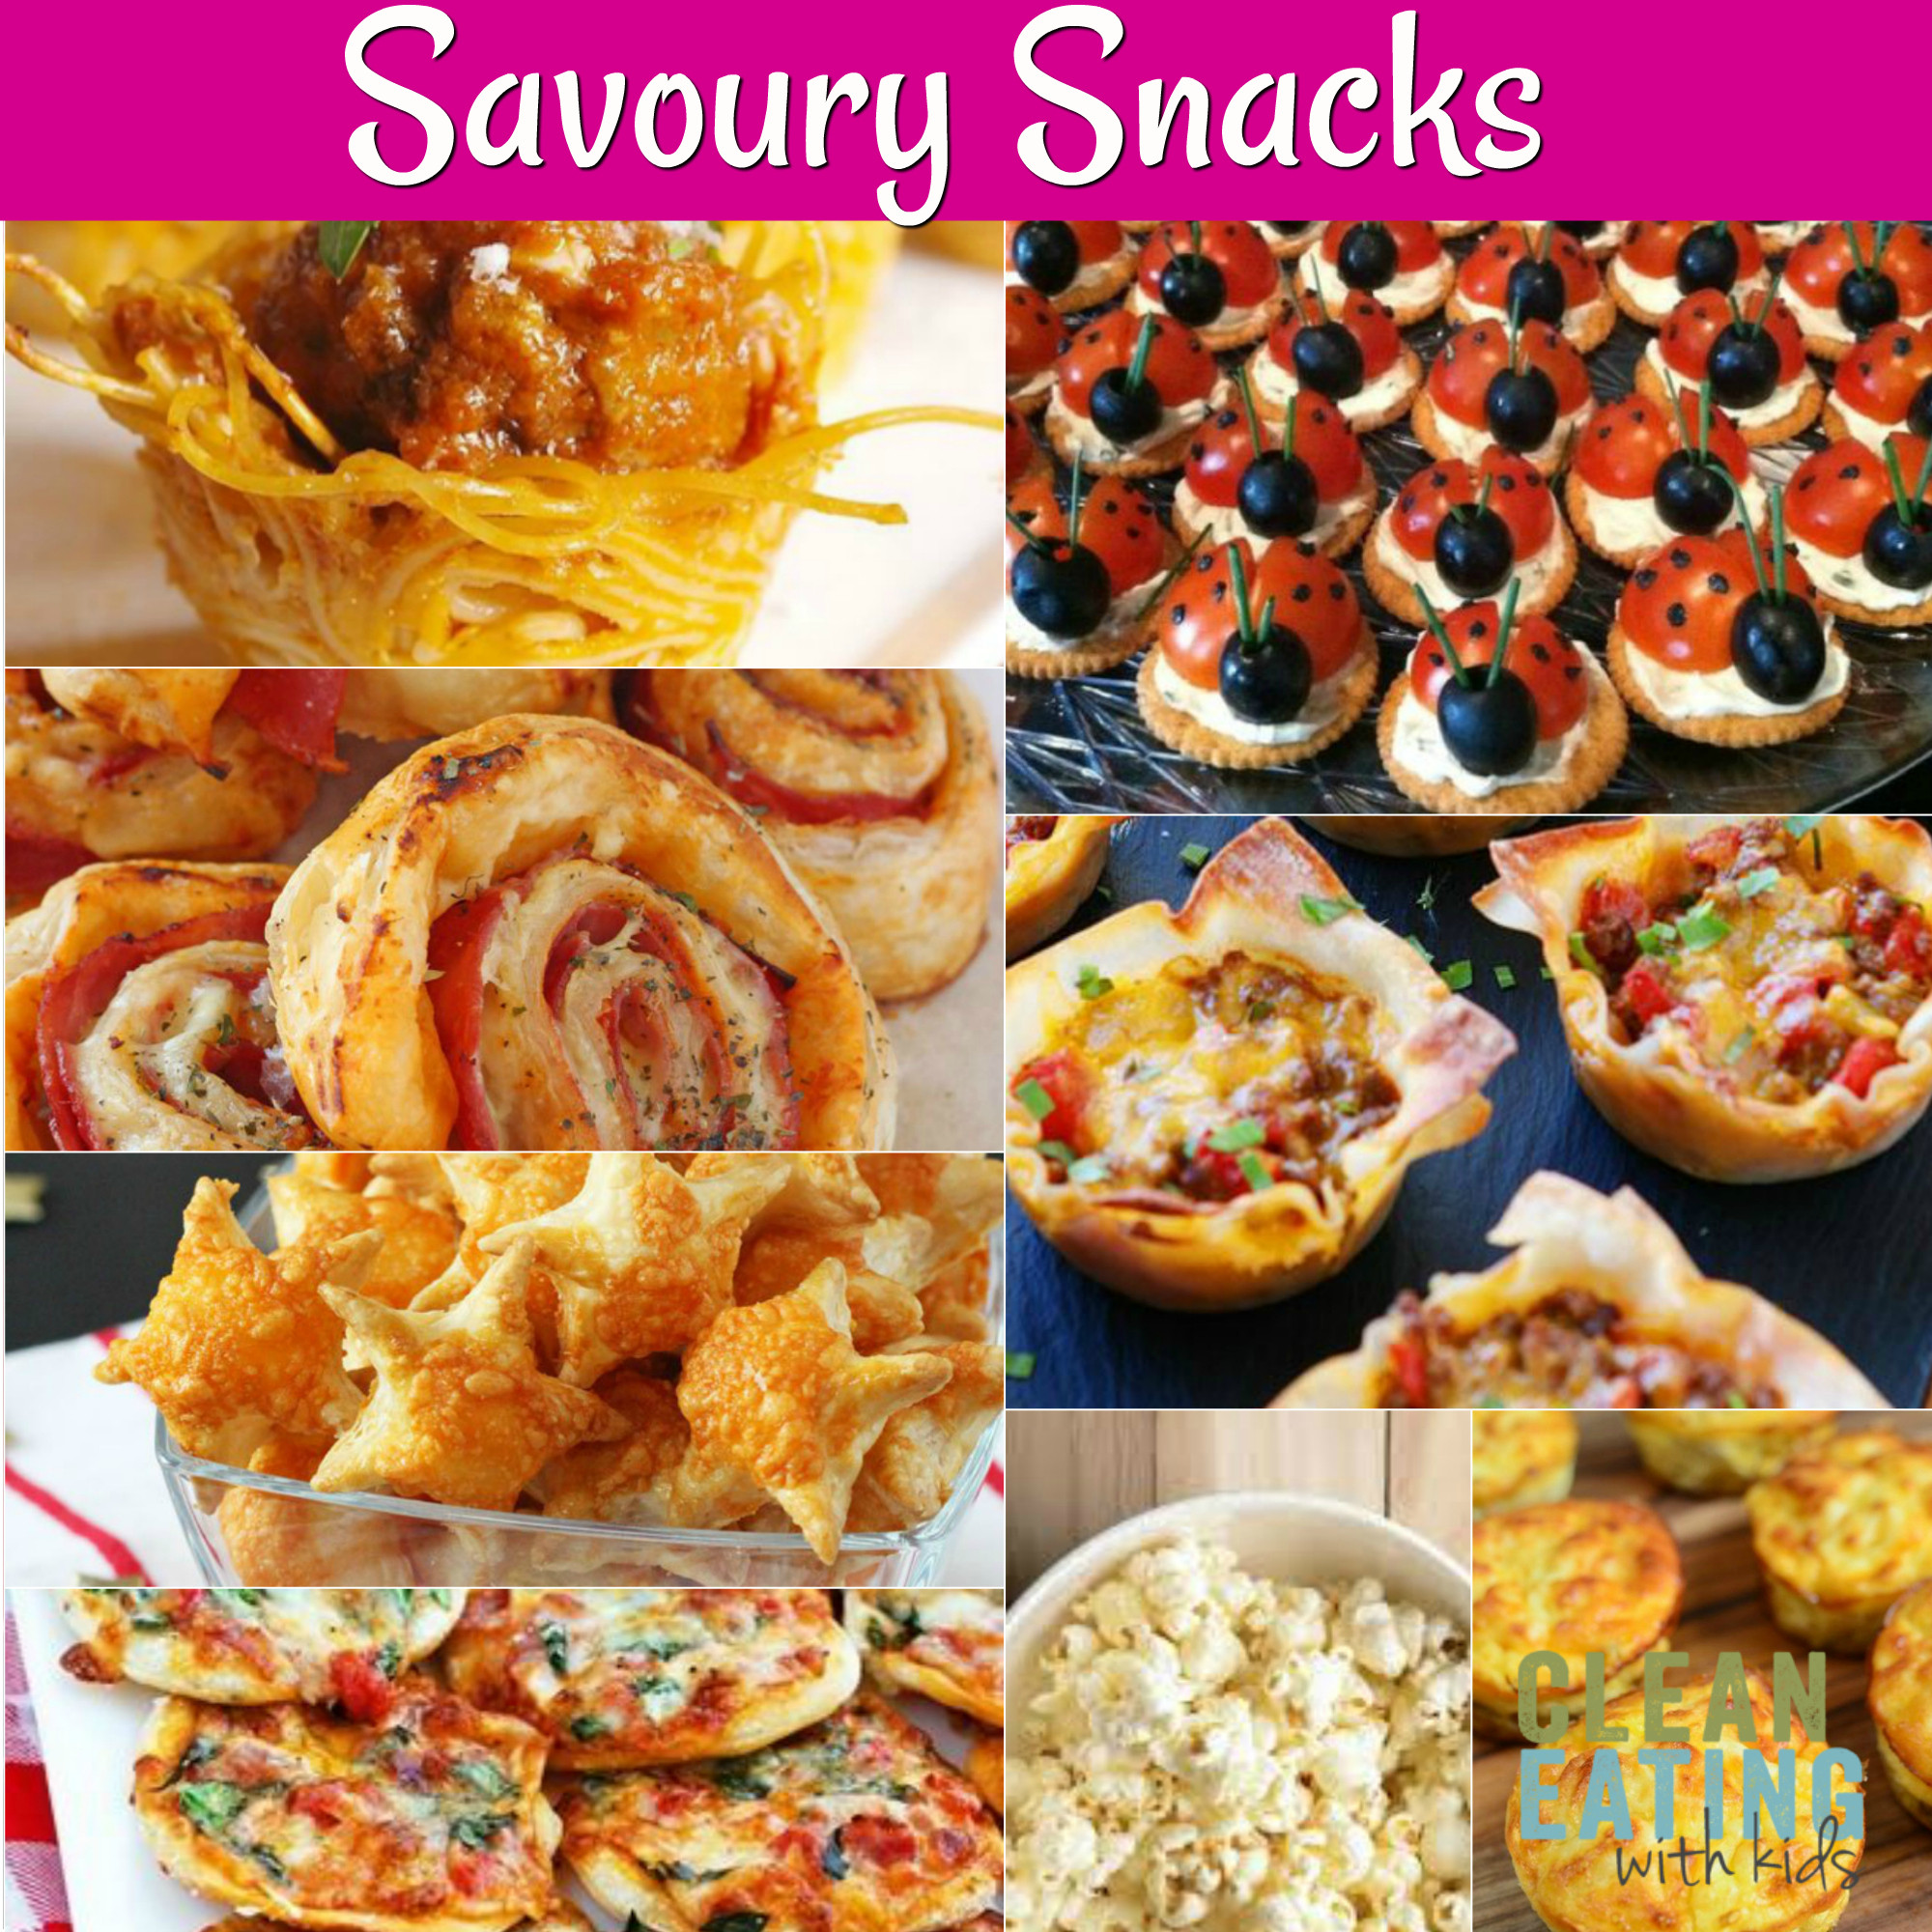 Party Food Ideas For Birthday
 25 Healthy Birthday Party Food Ideas Clean Eating with kids